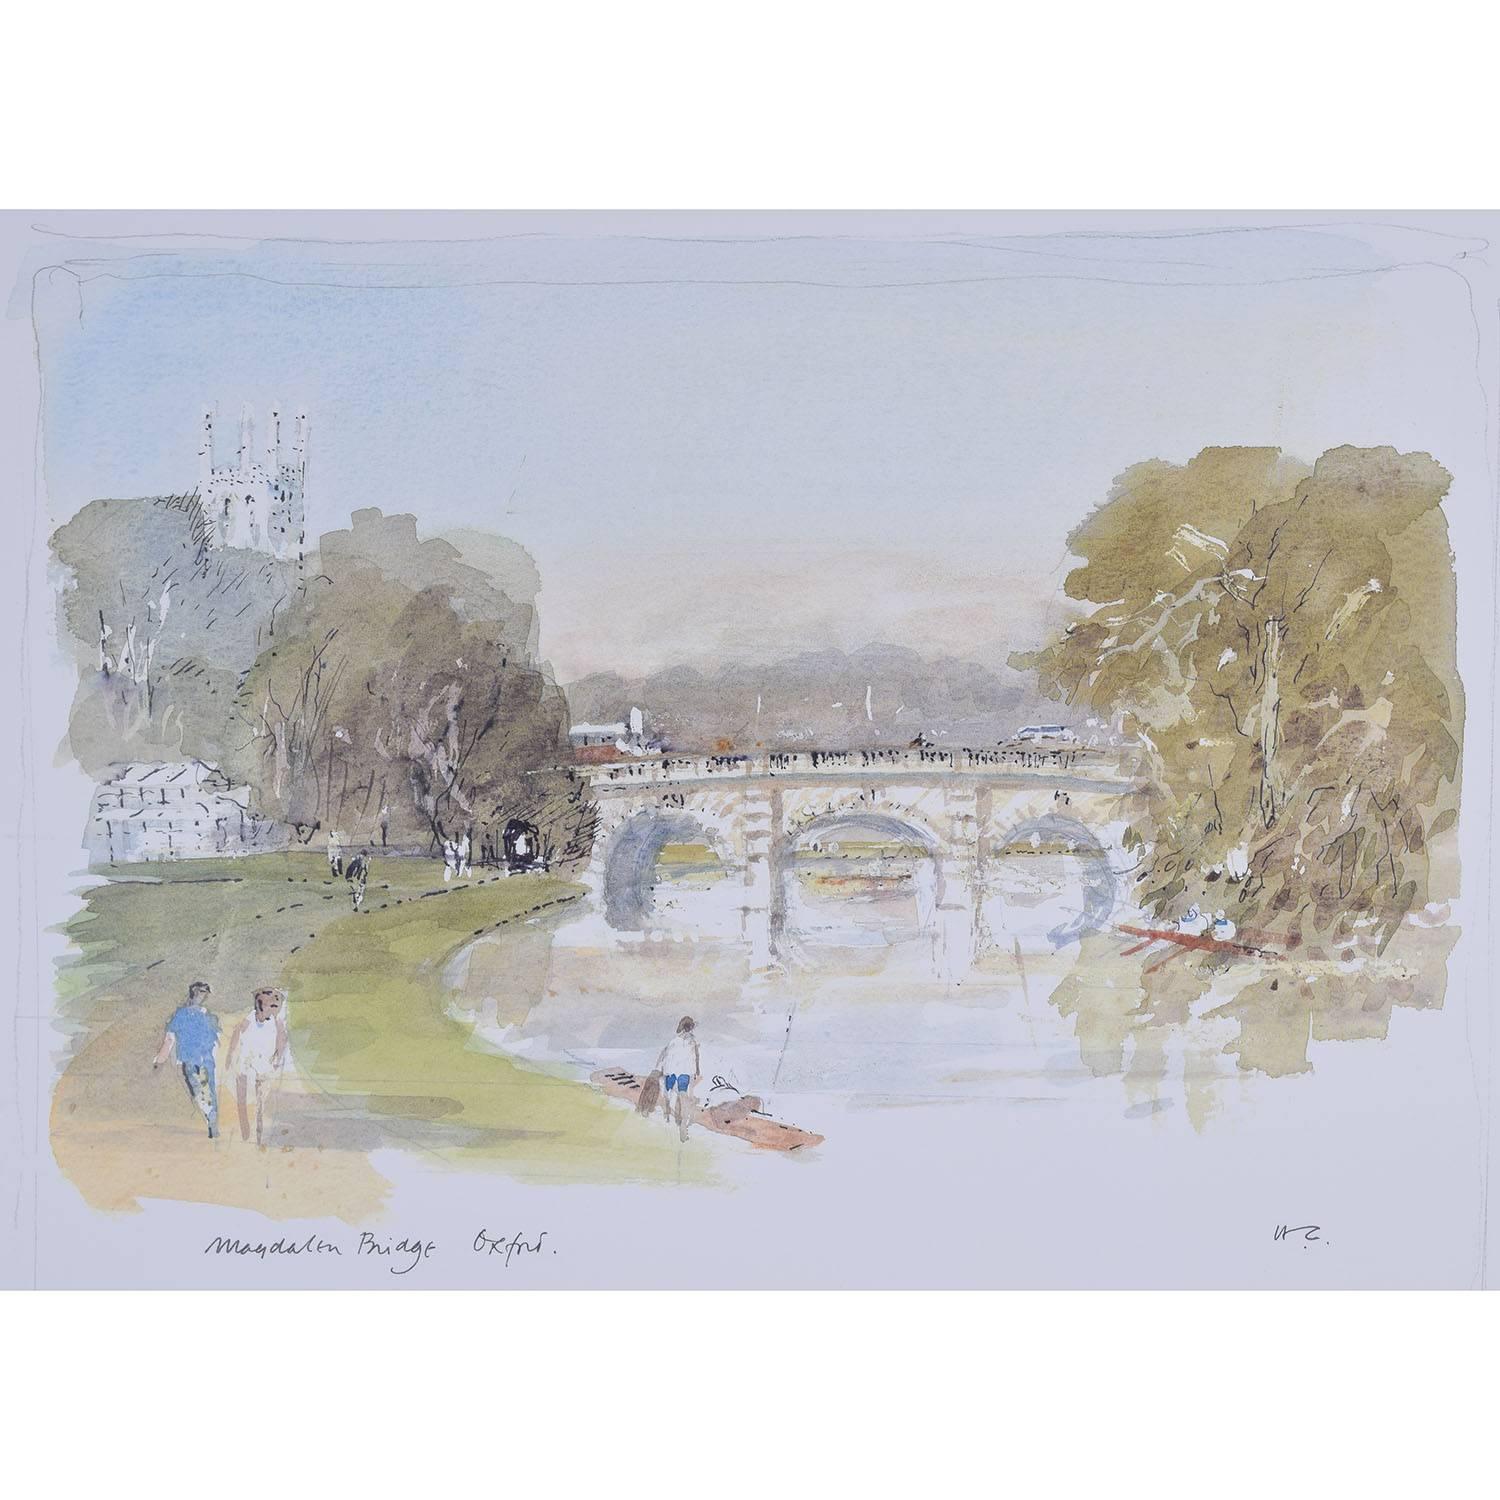 To see our other views of Oxford and Cambridge, scroll down to "More from this Seller" and below it click on "See all from this seller" - or send us a message if you cannot find the view you want.

Hugh Casson
Magdalen Bridge Oxford
Signed in